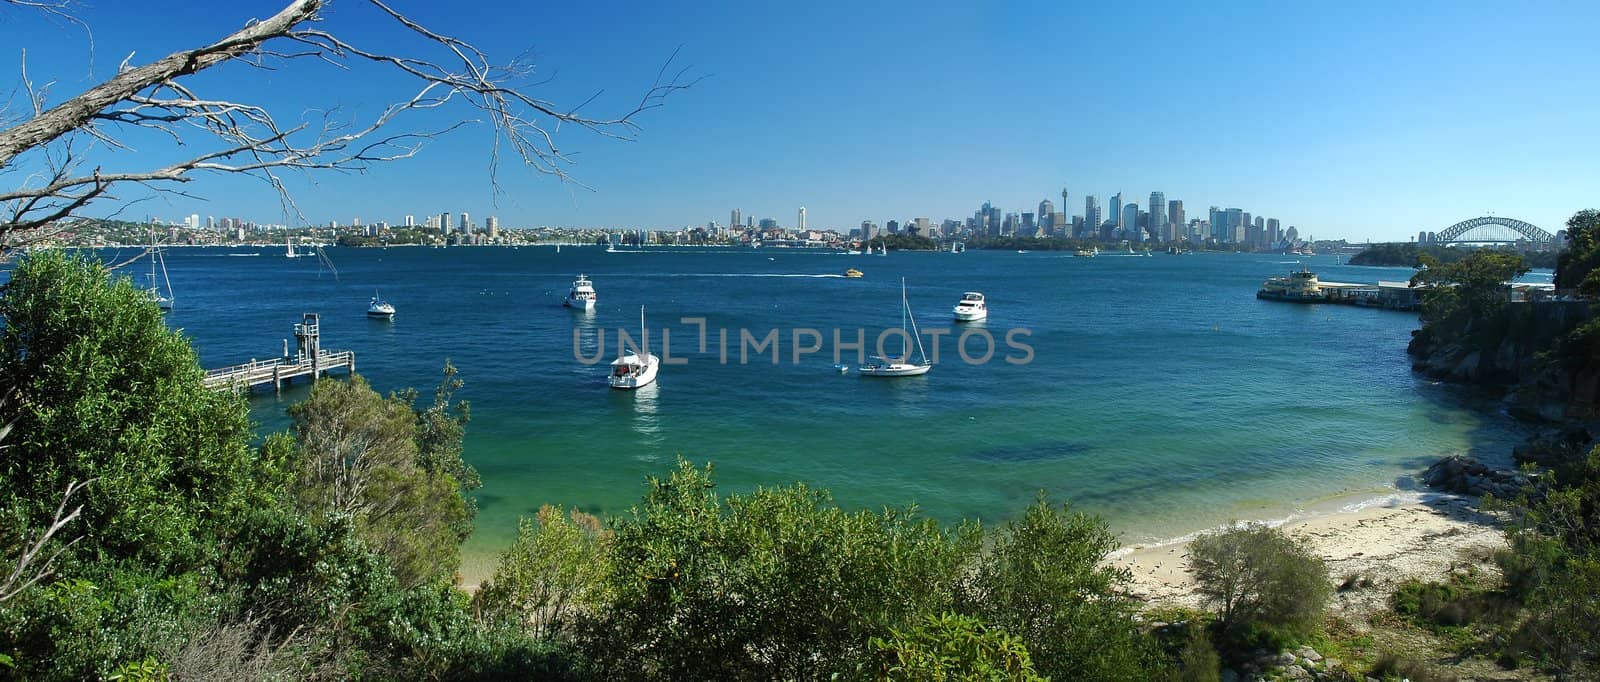 sydney panorama, opera house, harbour bridge and sydney tower in distance, yachts in foreground